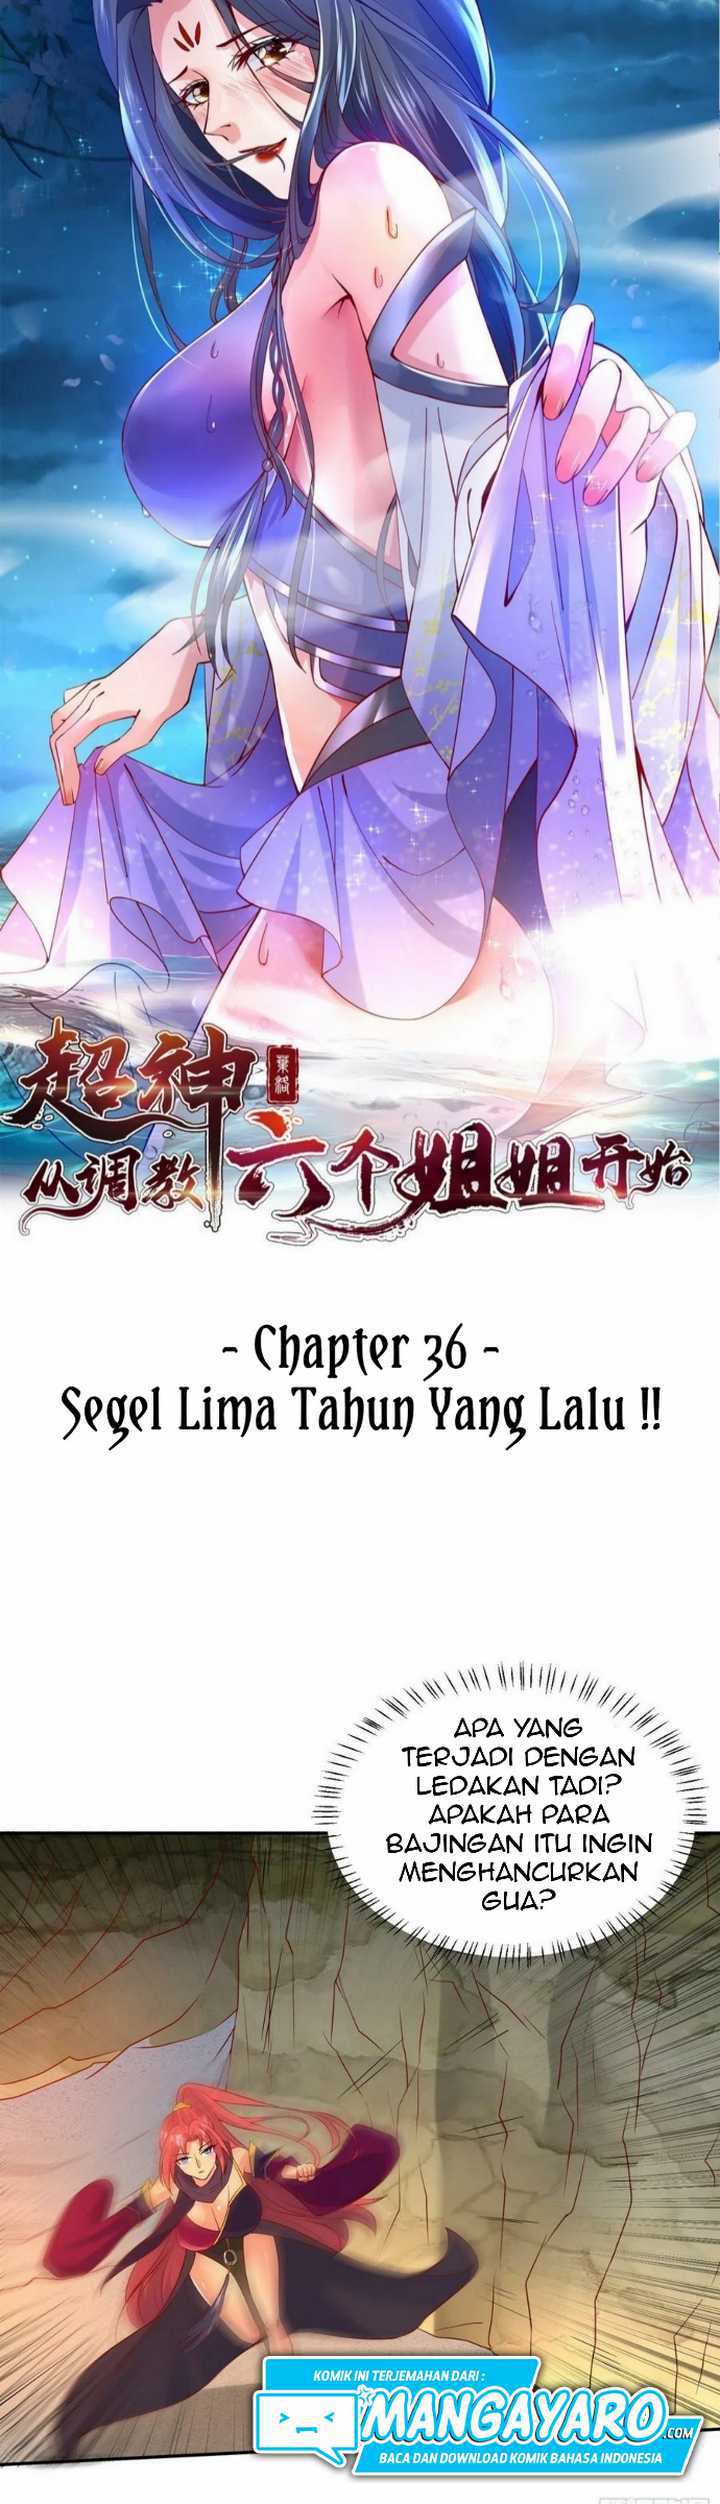 Becoming A God By Teaching Six Sisters Chapter 36